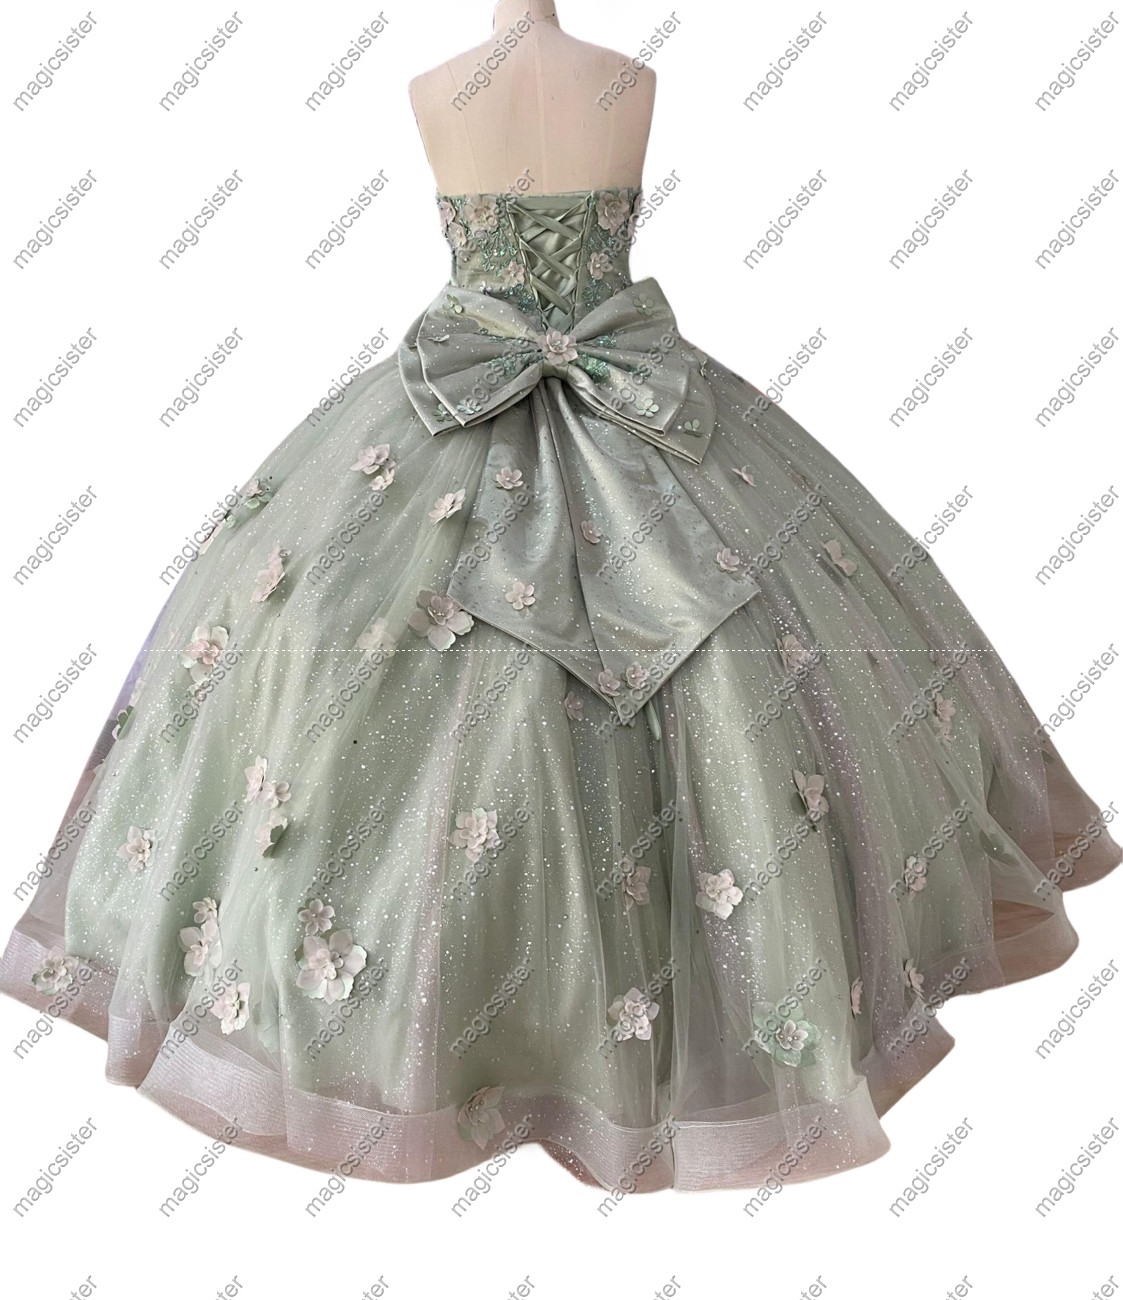 Factory Wholesale TopSelling Green System Quinceanera Dress